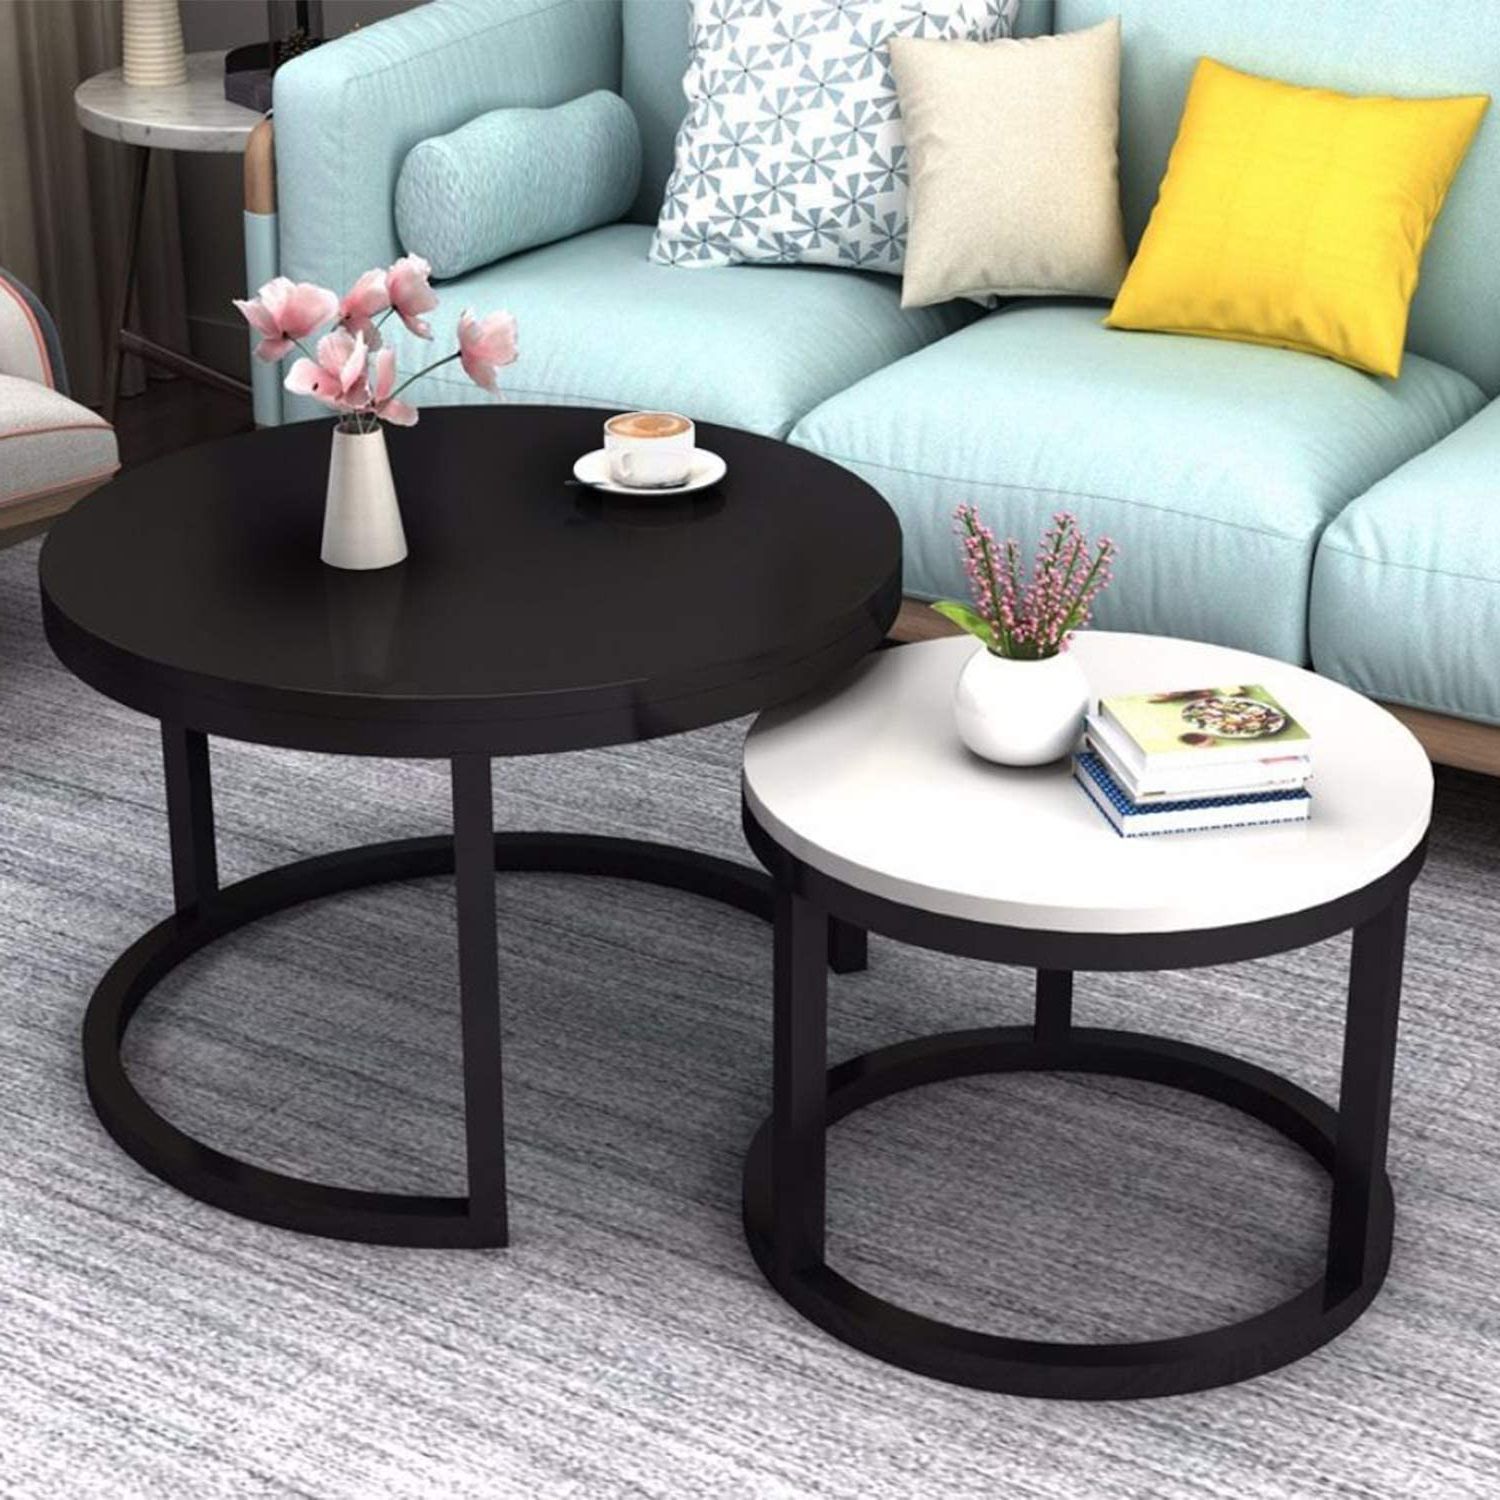 Current Caviar Black Cocktail Tables Intended For 2 Round Tea Table Coffee Table Desk Sets (Gallery 1 of 20)